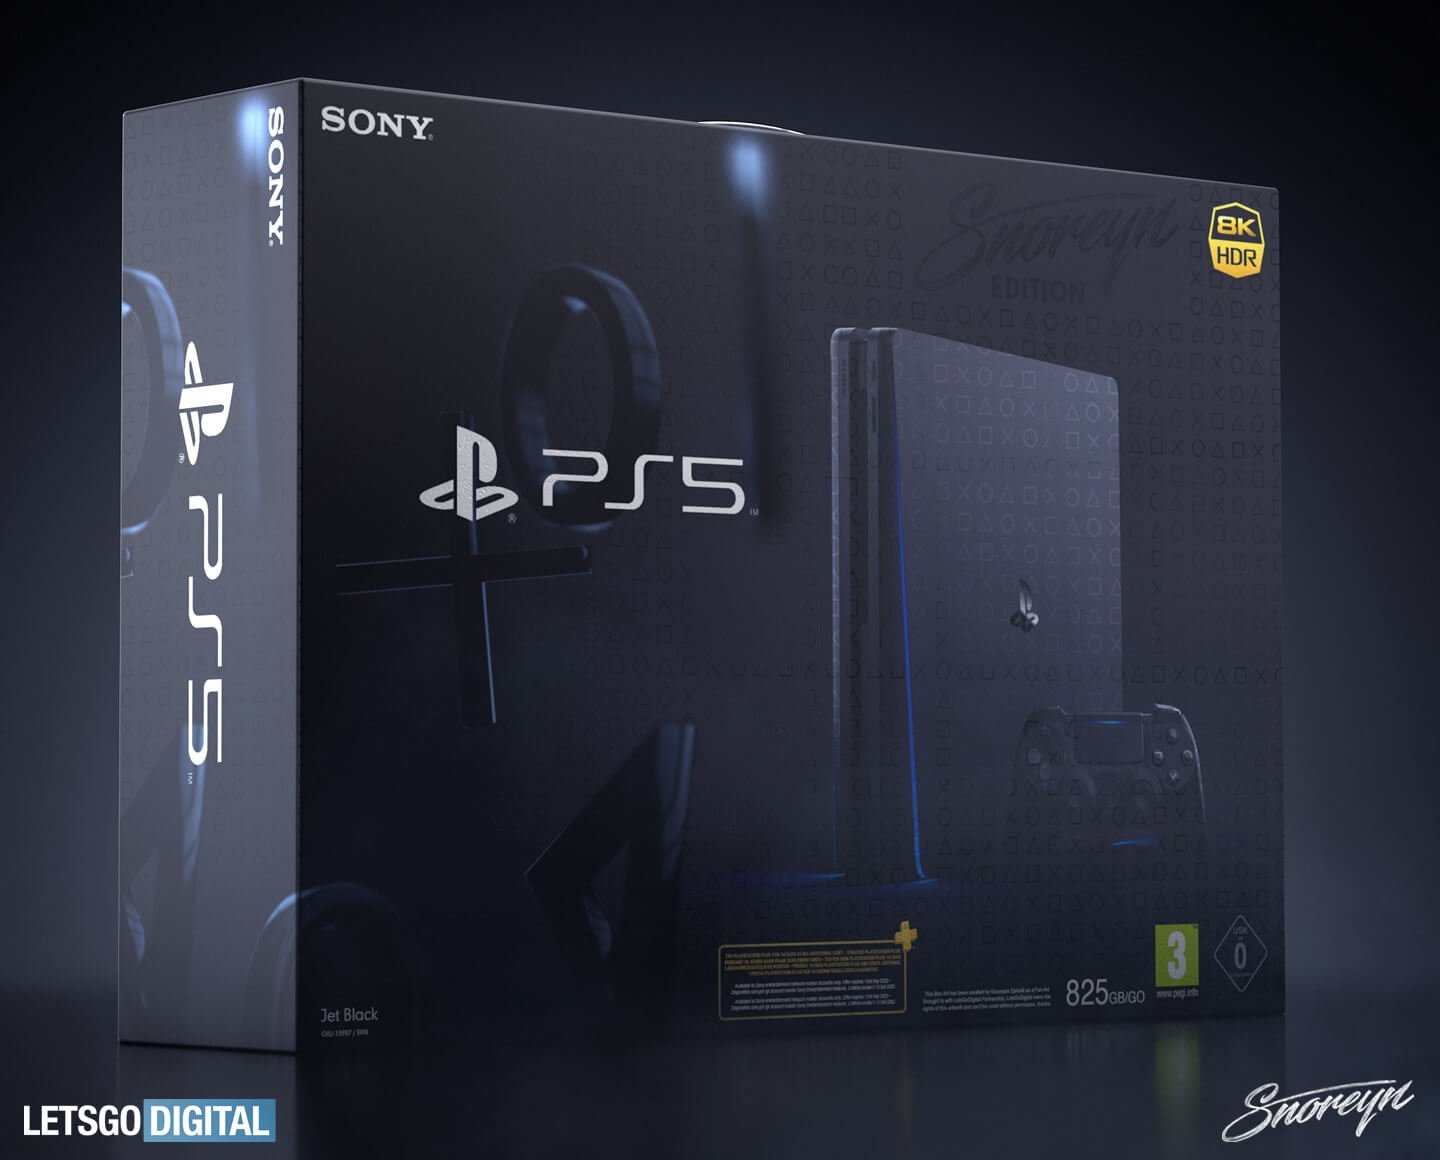 This is our first look at the PlayStation 5 retail box in concept form